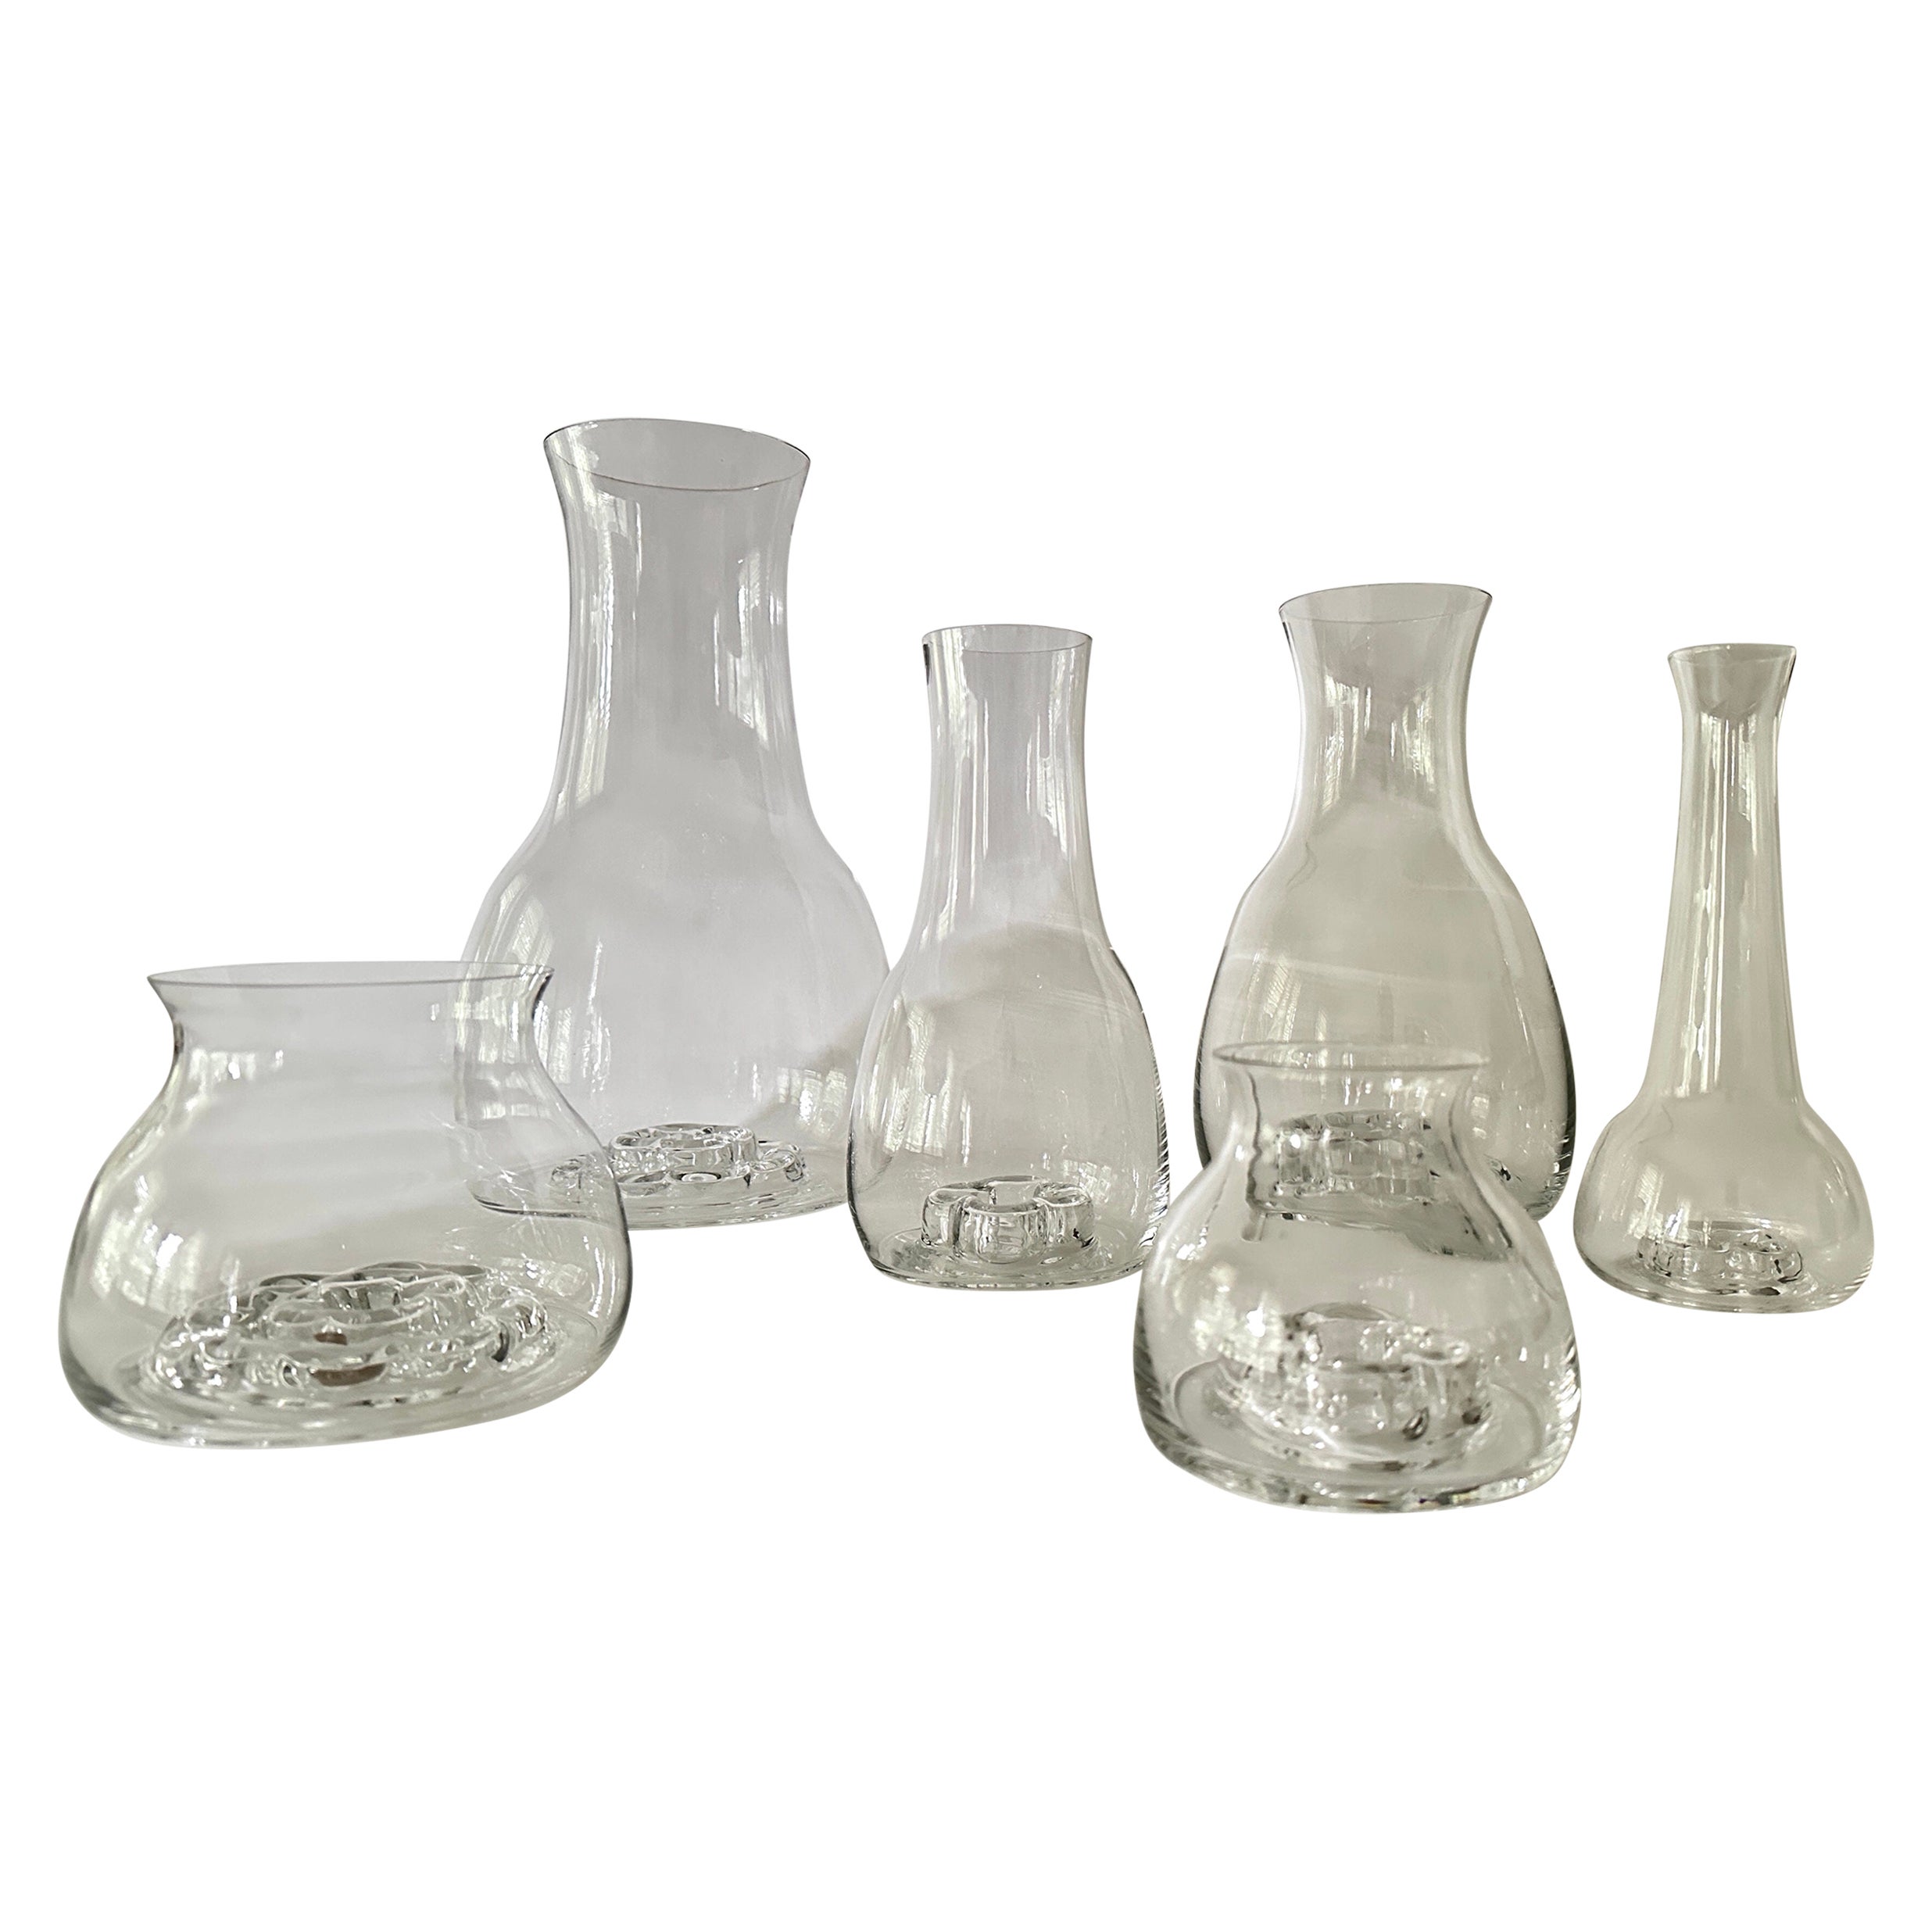 Six Clear Olle Alberius Designed Vases From Orrefors For Sale